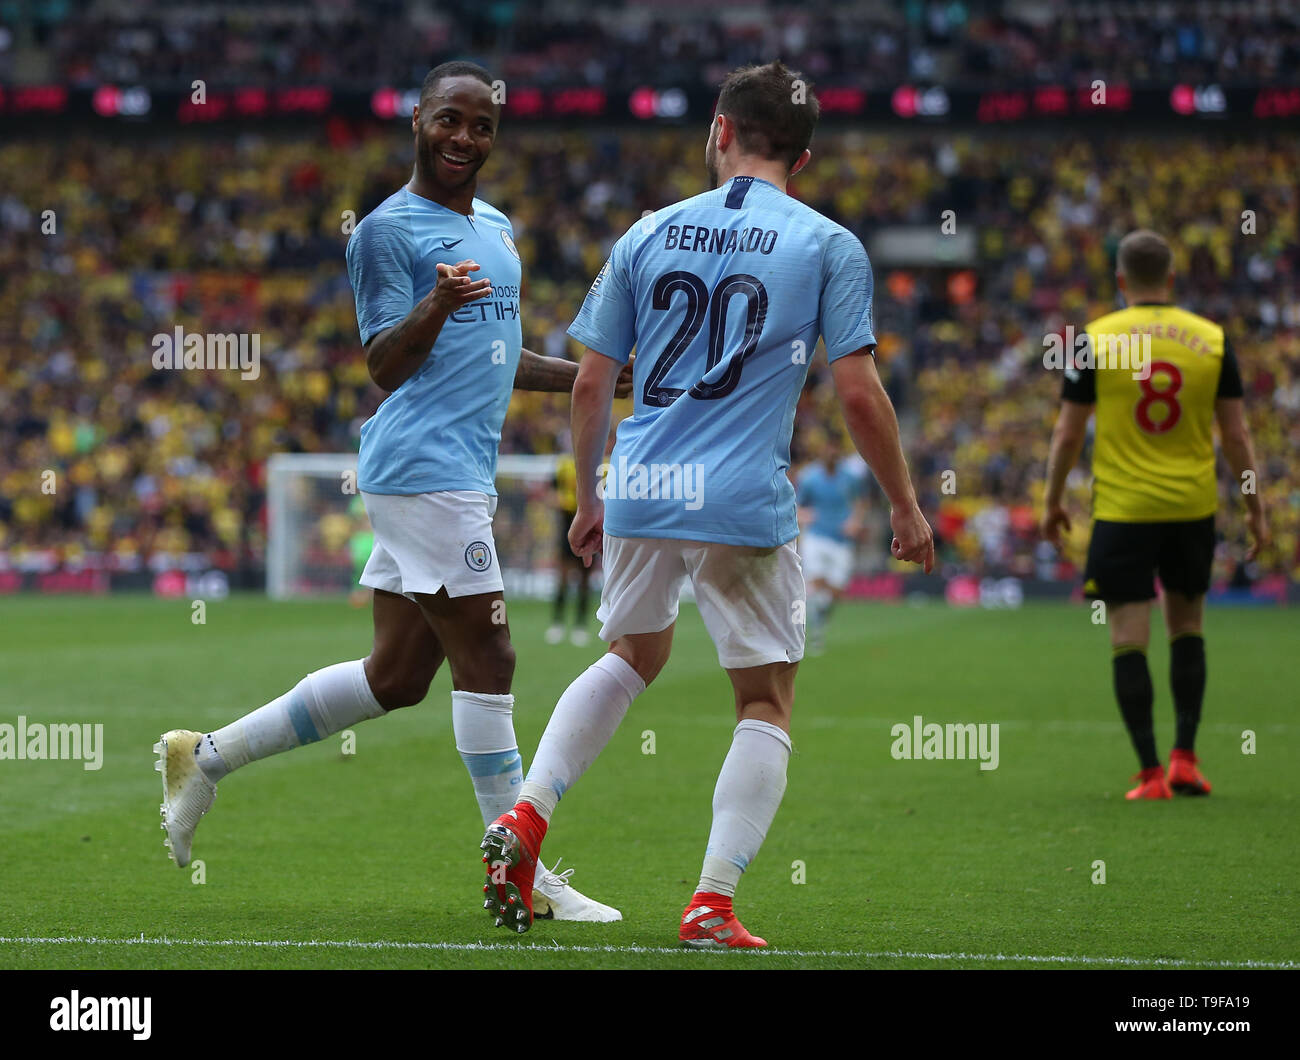 London, UK. 18 May 2019 Manchester City's Raheem Sterling celebrates scoring during the Emirates FA Cup Final between Manchester City and Watford at the Wembley Stadium in London. 18 May 2019. EDITORIAL USE ONLY. No use with unauthorized audio, video, data, fixture lists, club/league logos or 'live' services. Online in-match use limited to 120 images, no video emulation. No use in betting, games or single club/league/player publications. Credit: James Boardman / Alamy Live News Stock Photo